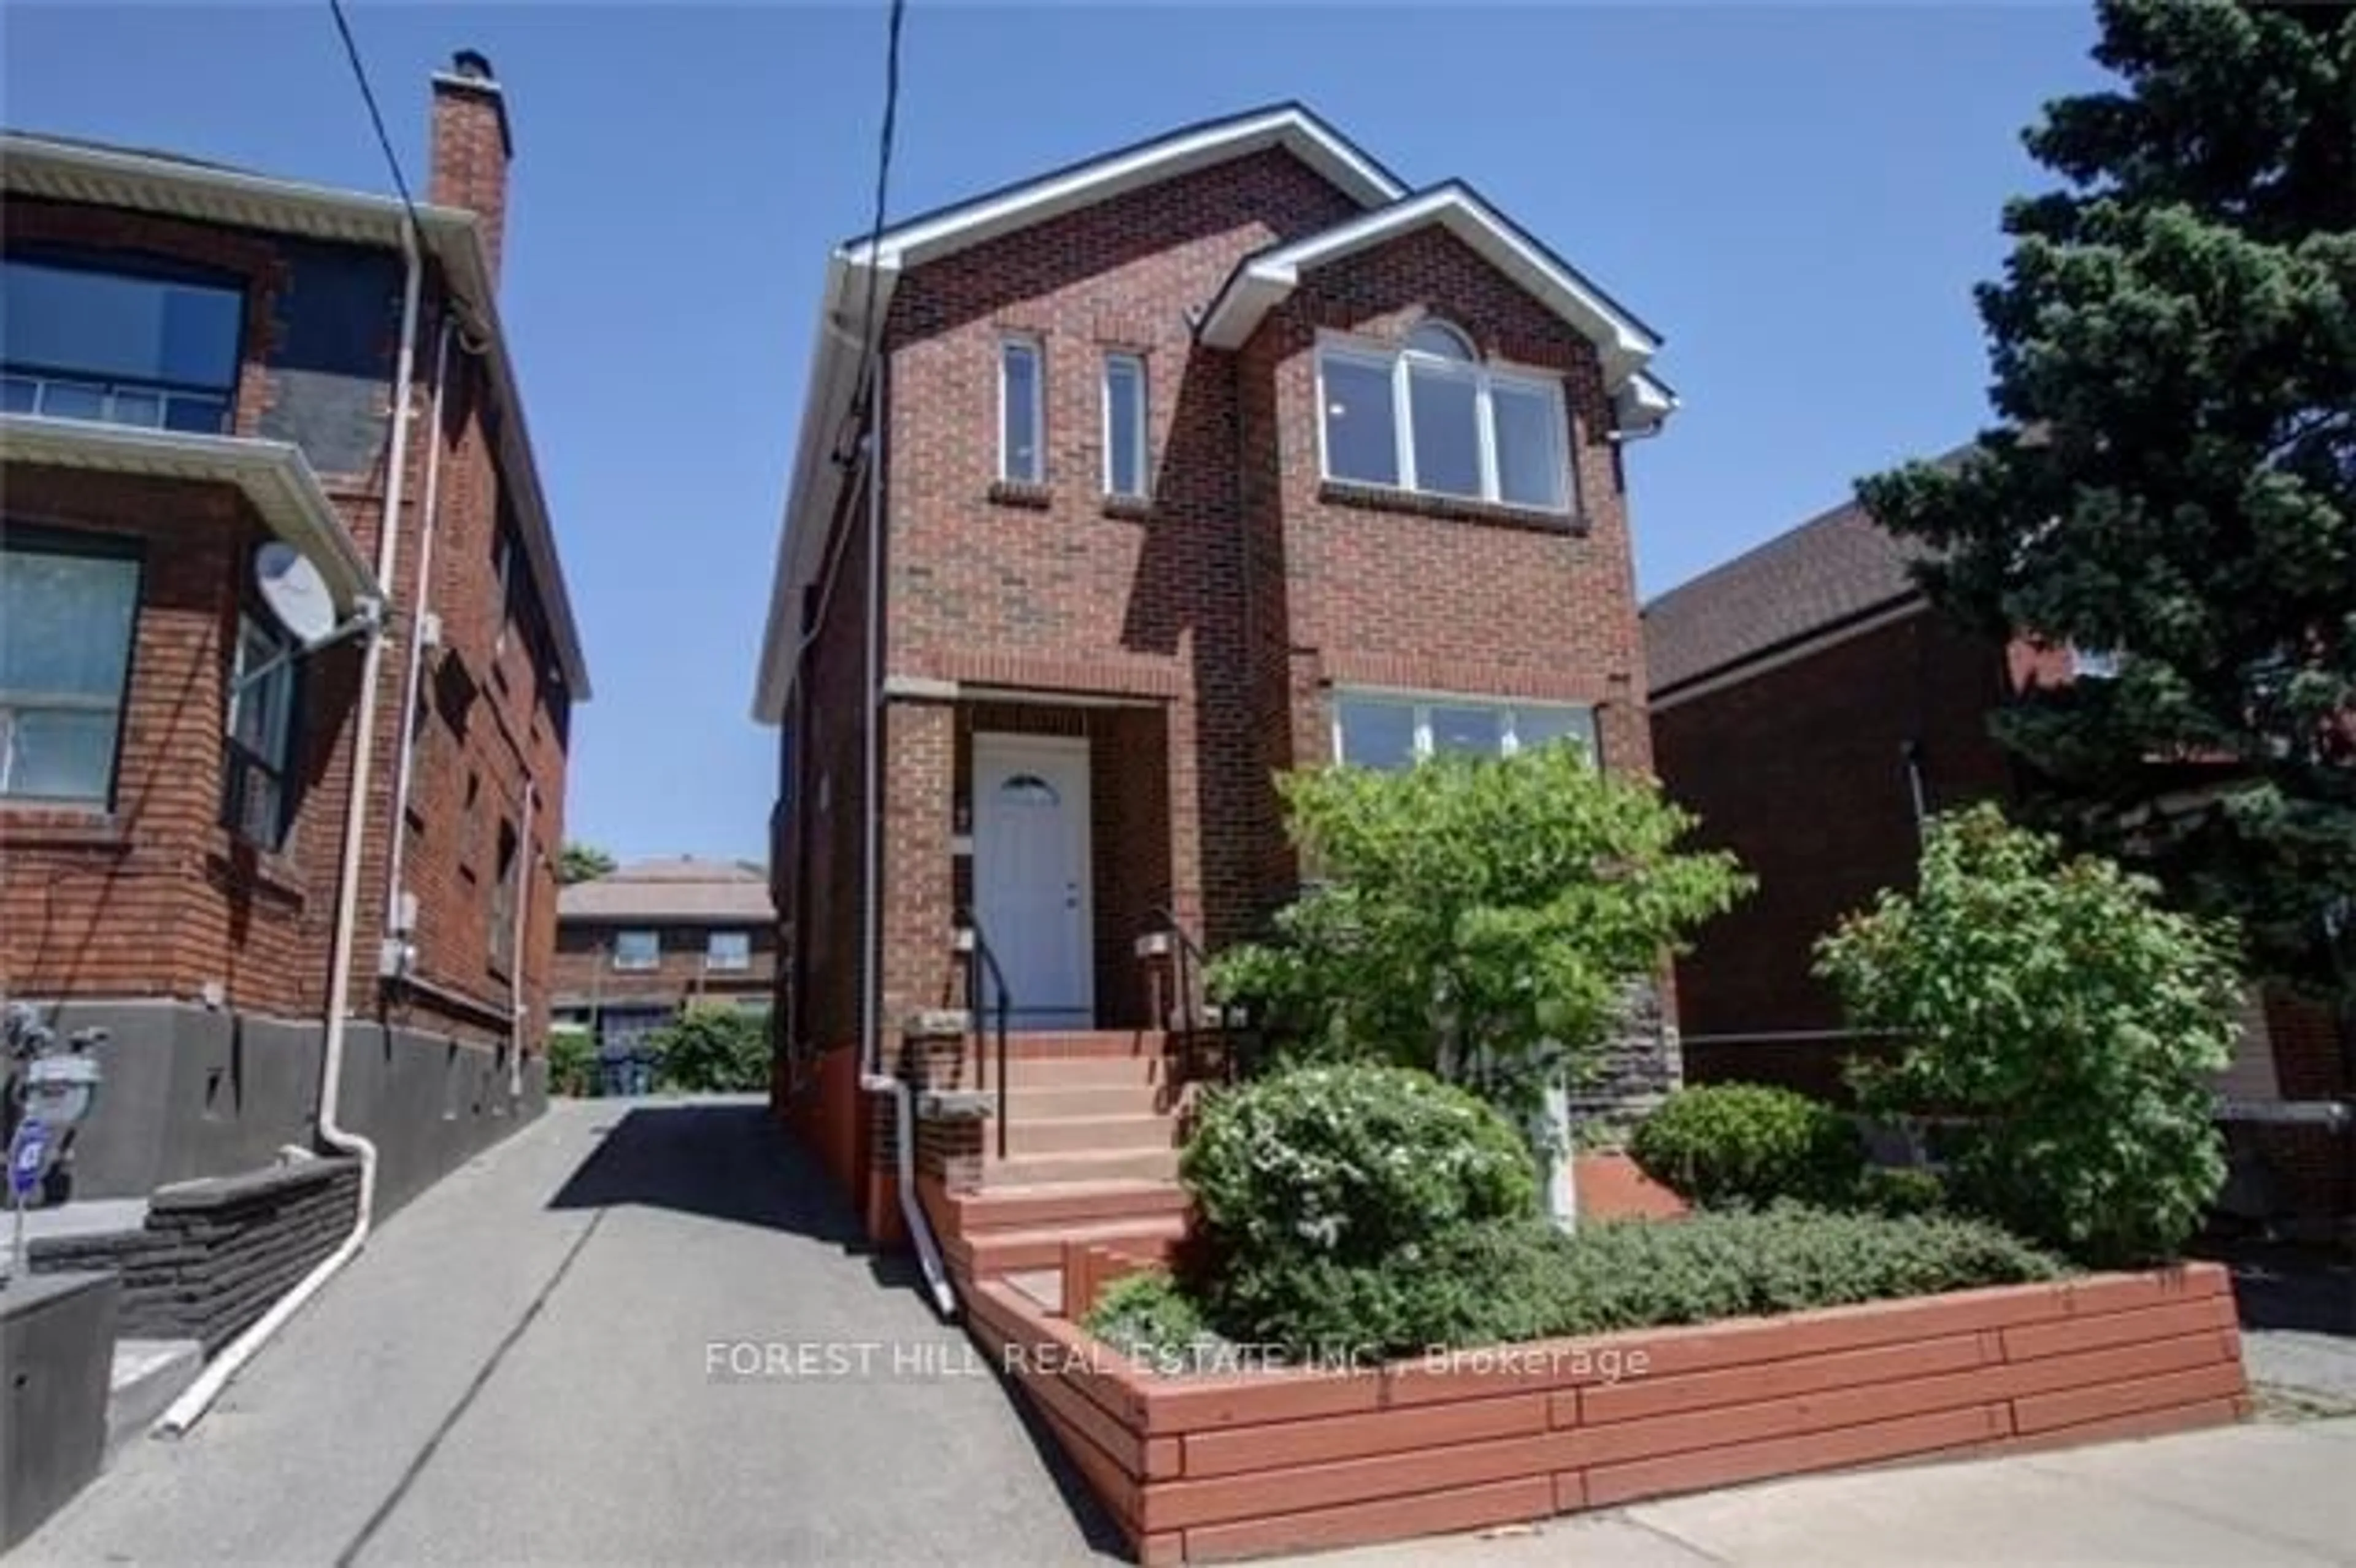 Home with brick exterior material for 447 Oakwood Ave, Toronto Ontario M6E 2W4